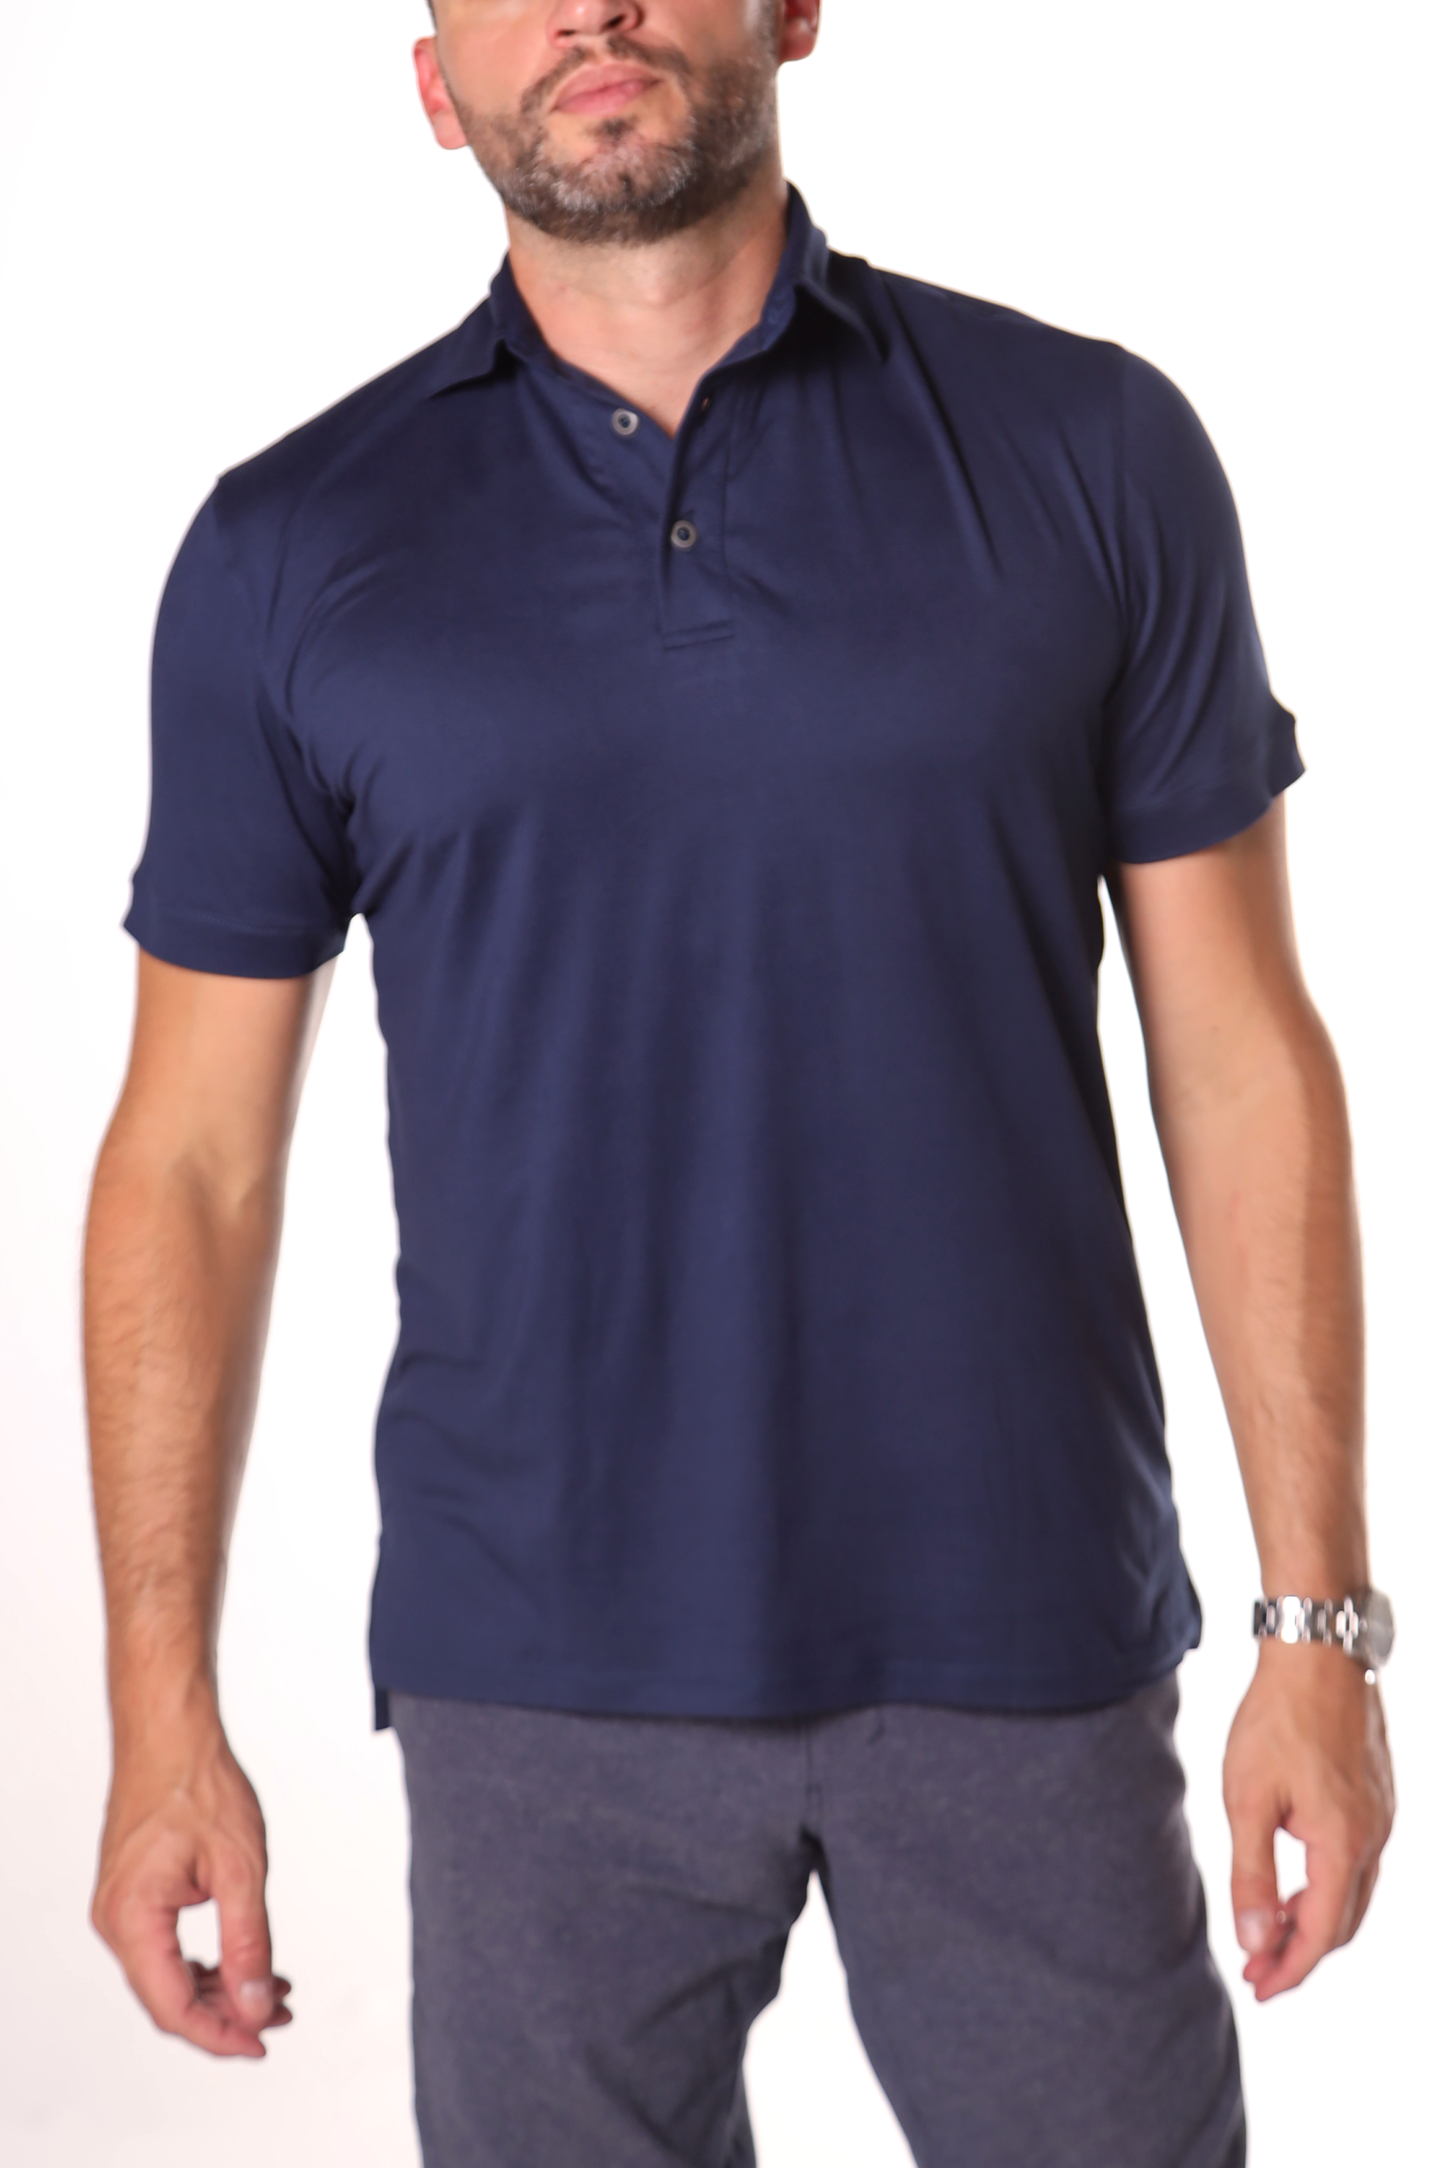 The Barenaked Polo - Navy